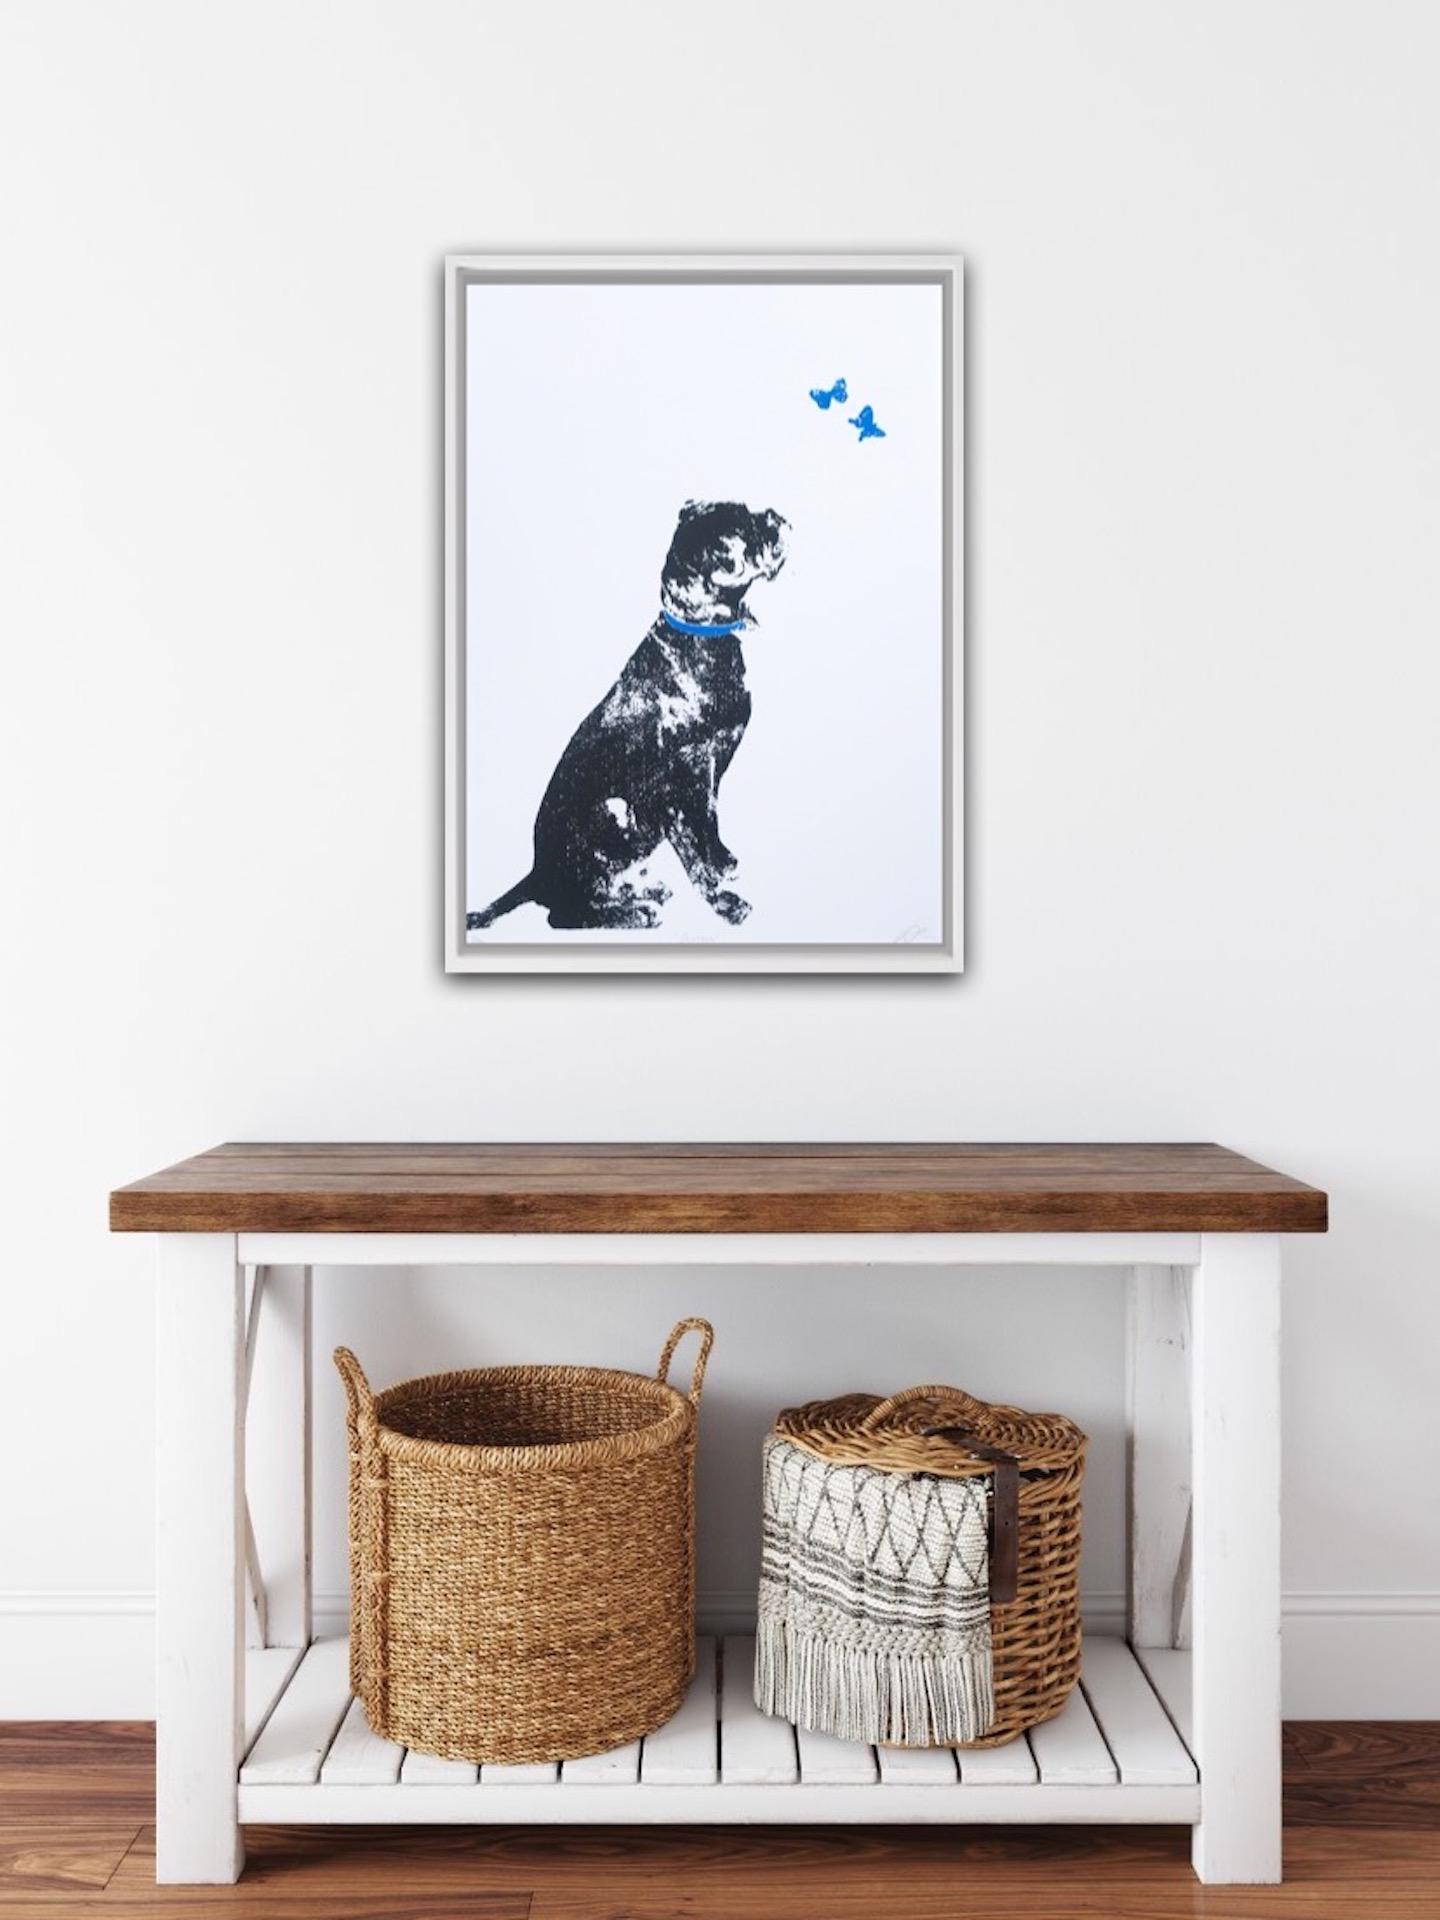 ‘Curious’ original silkscreen print.
A Boxer dog watching some blue butterflies fluttering above his head.
50 prints were made and each one is completely unique. Signed and hand printed by the artist Katie Edwards.
Sold unframed
Please note that in